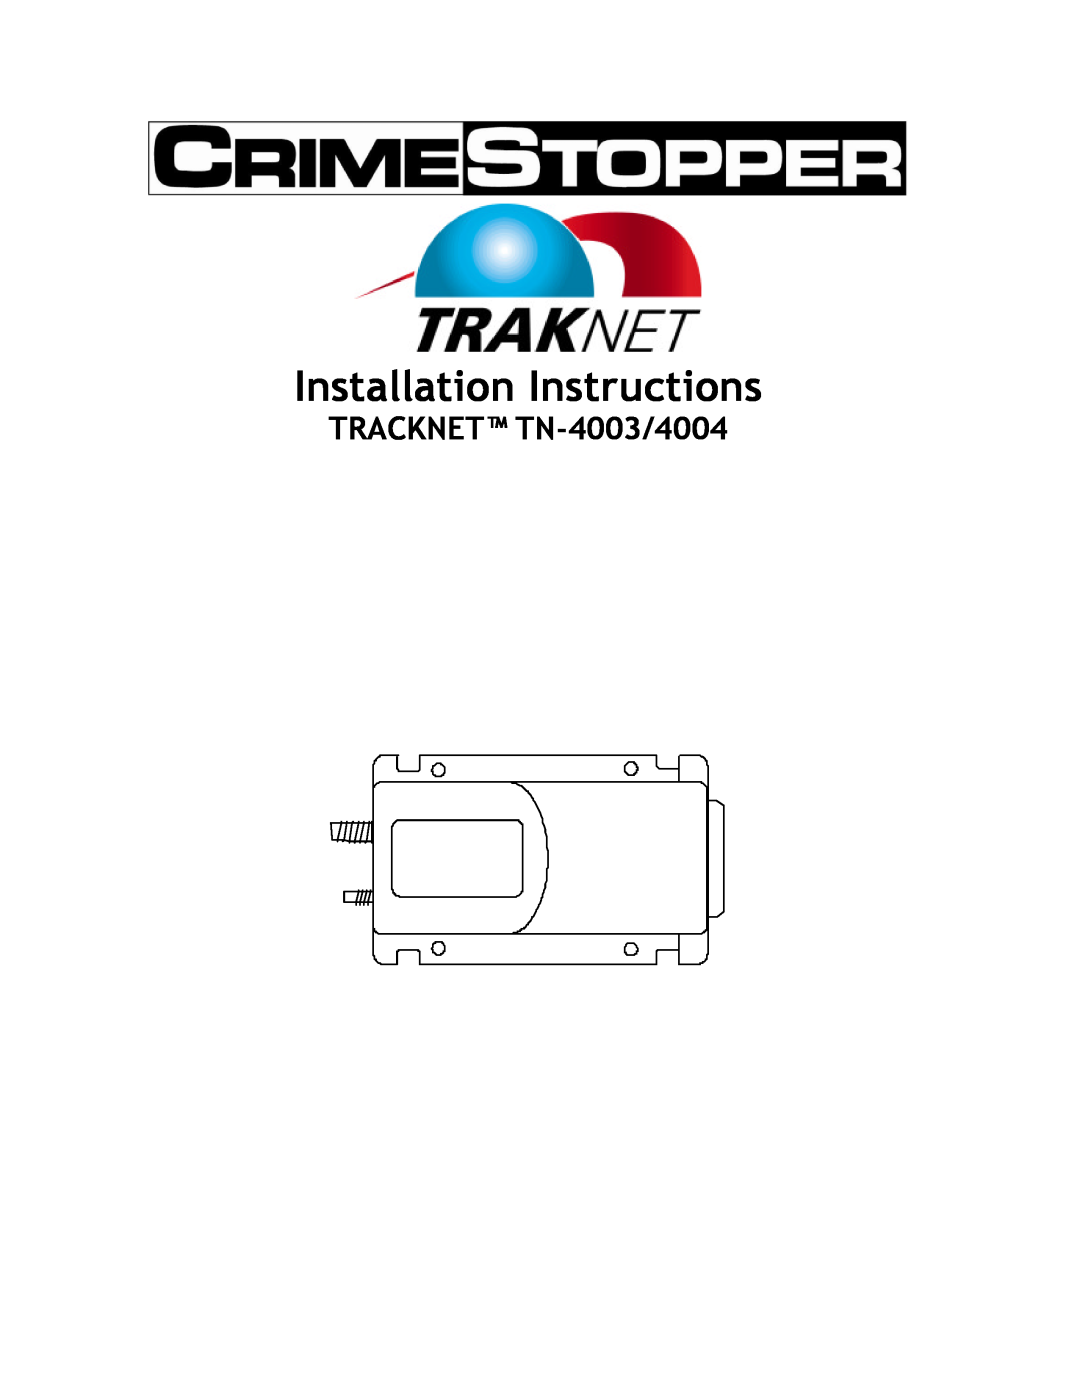 Crimestopper Security Products TN-4004 installation instructions Installation Instructions, TRACKNET TN-4003/4004 